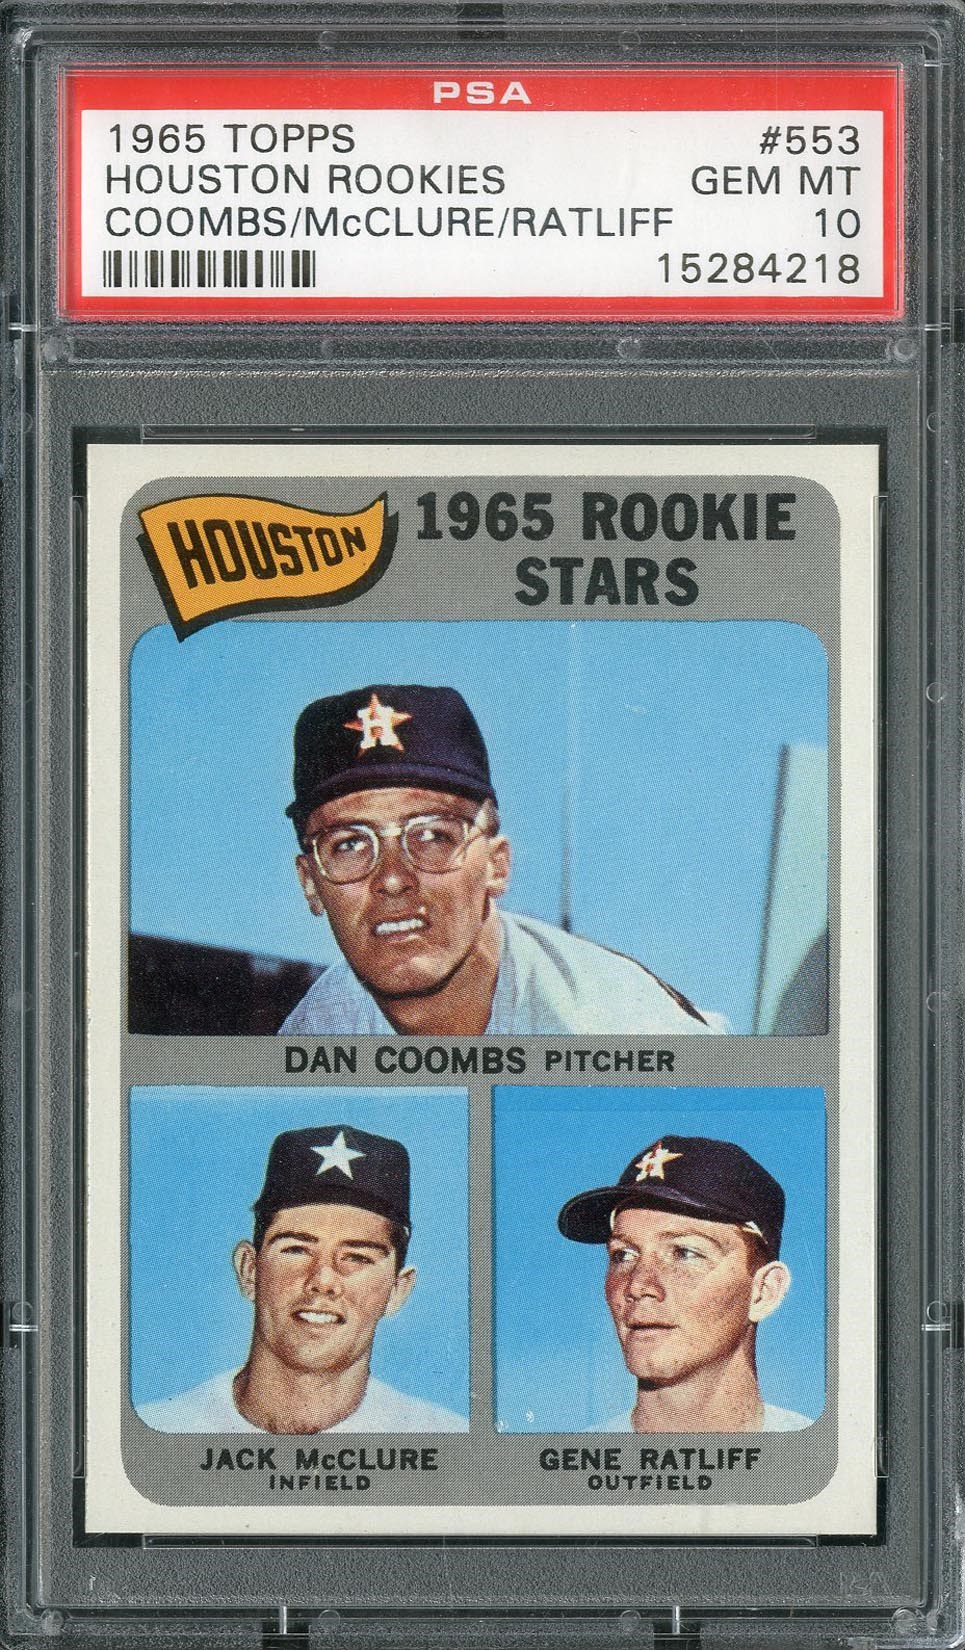 Baseball and Trading Cards - 1965 Topps Houston Rookies #553 PSA GEM MT 10